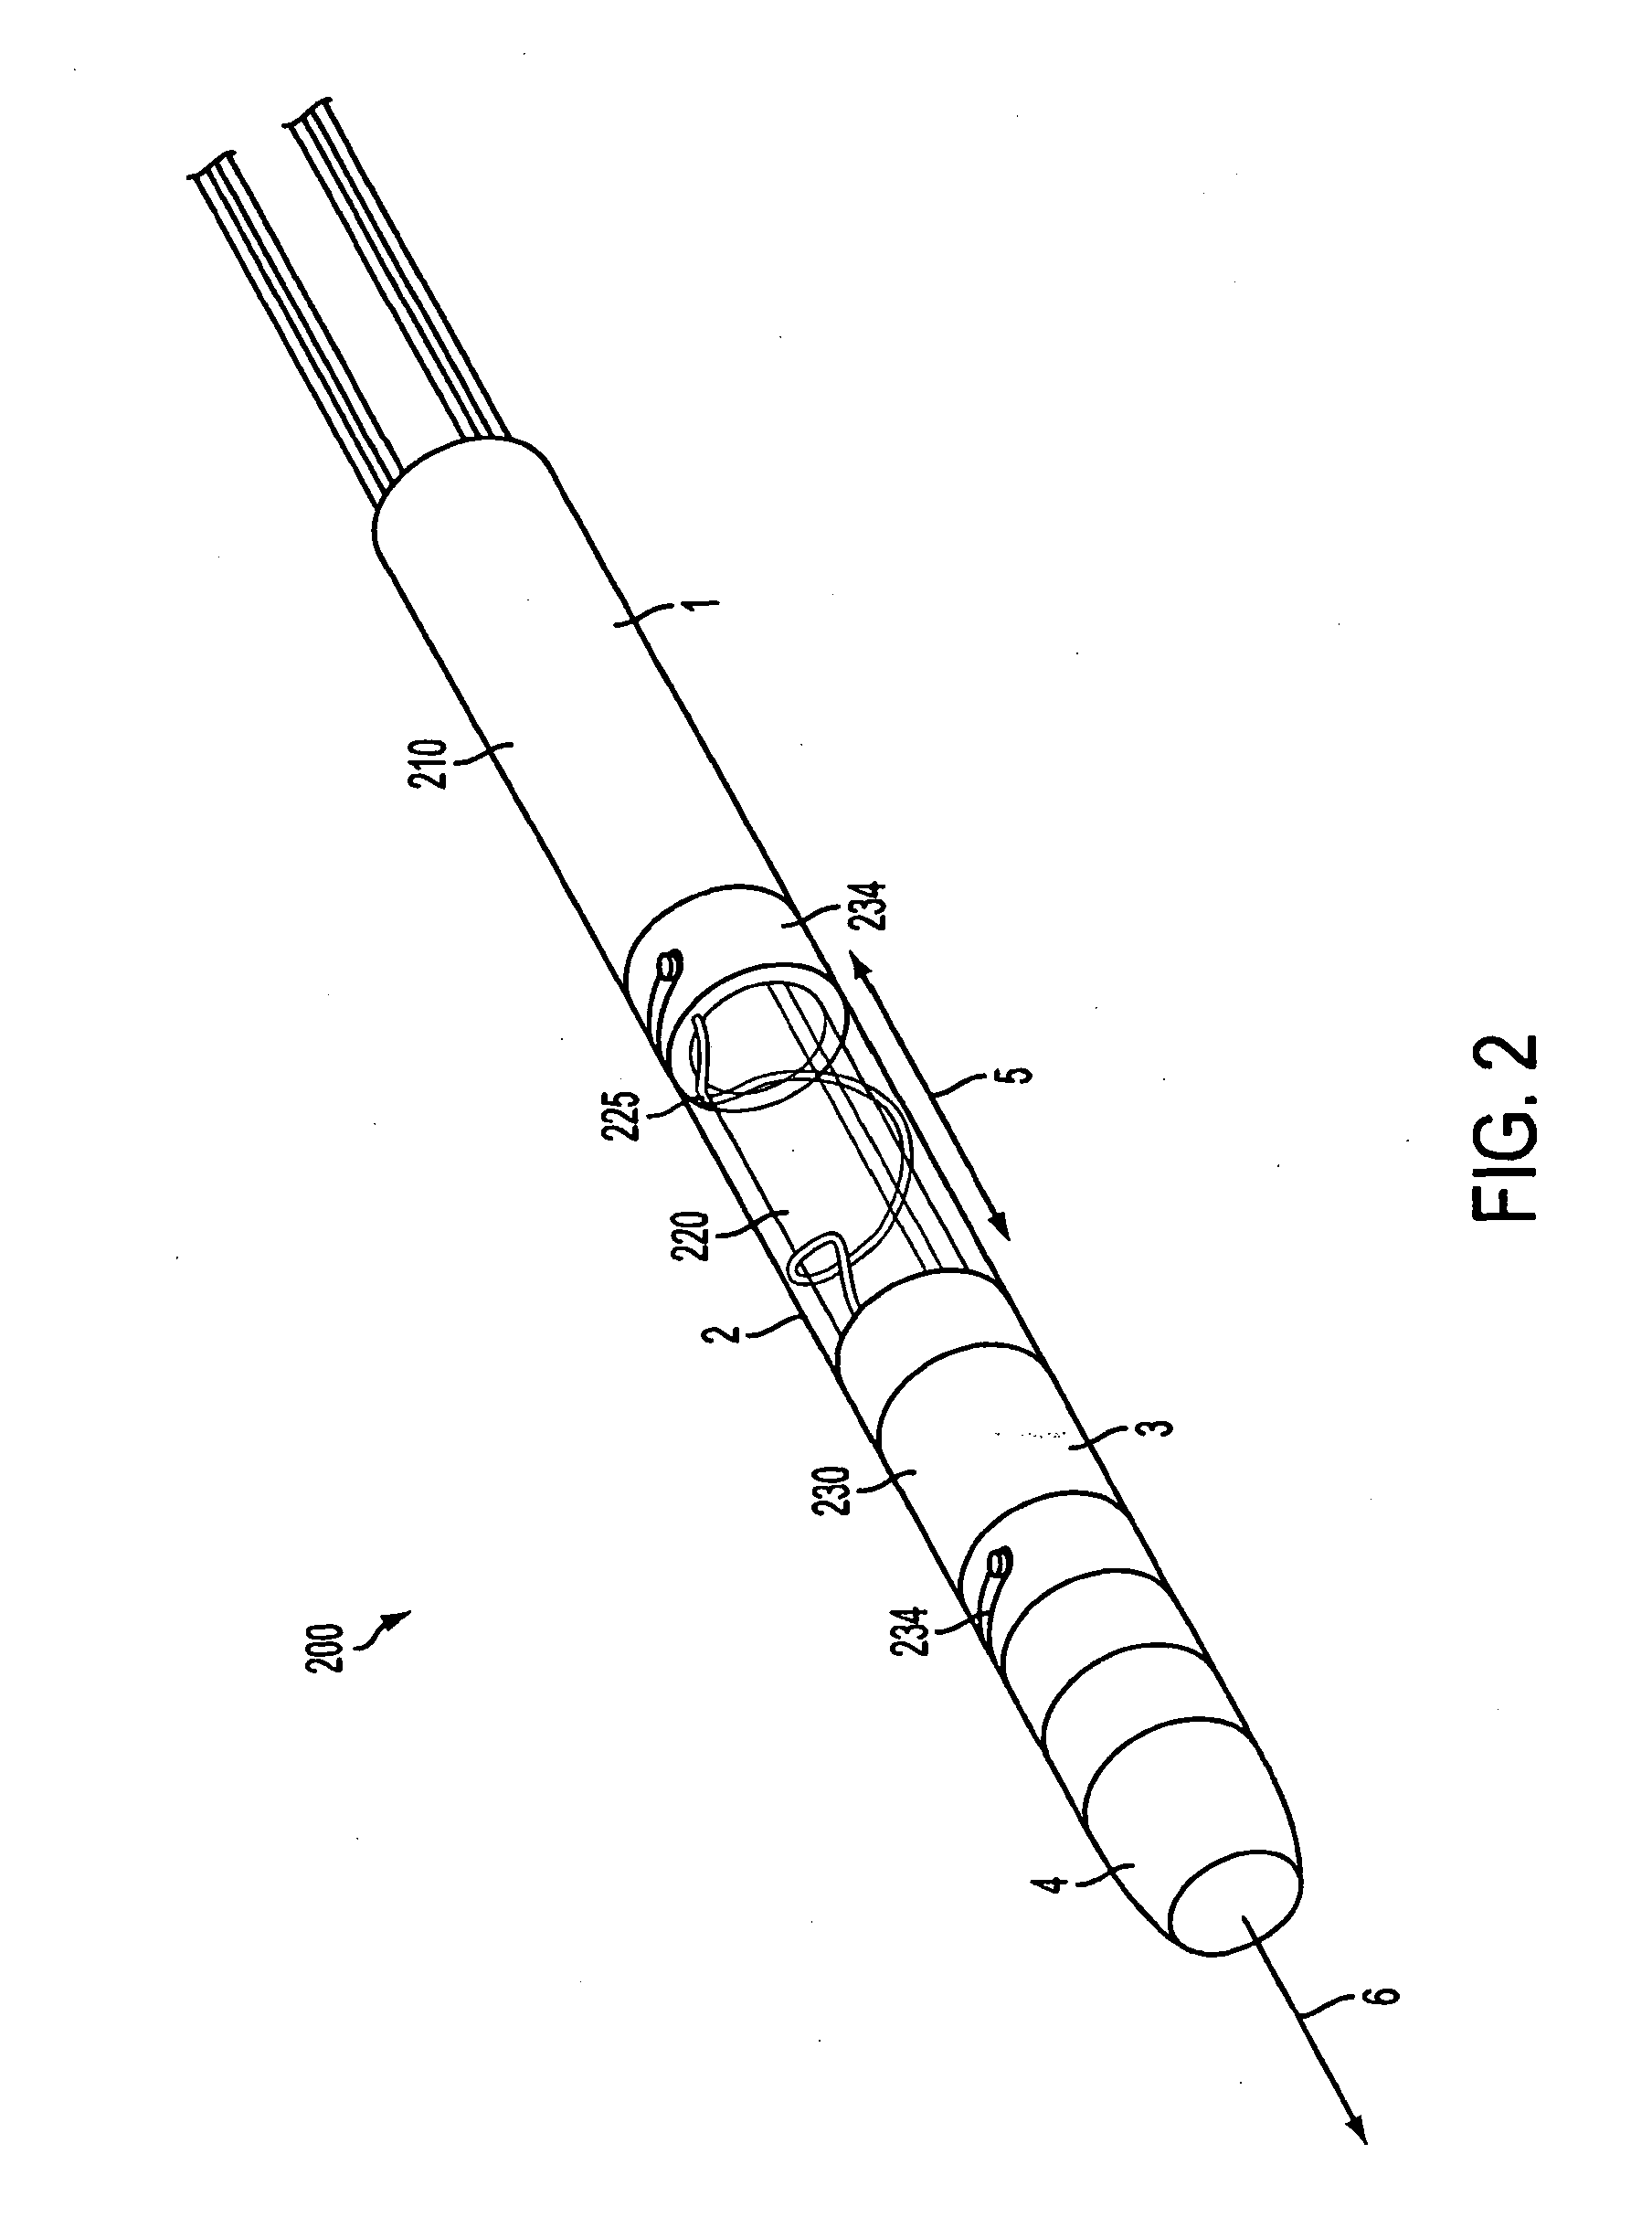 Lead extraction methods and apparatus